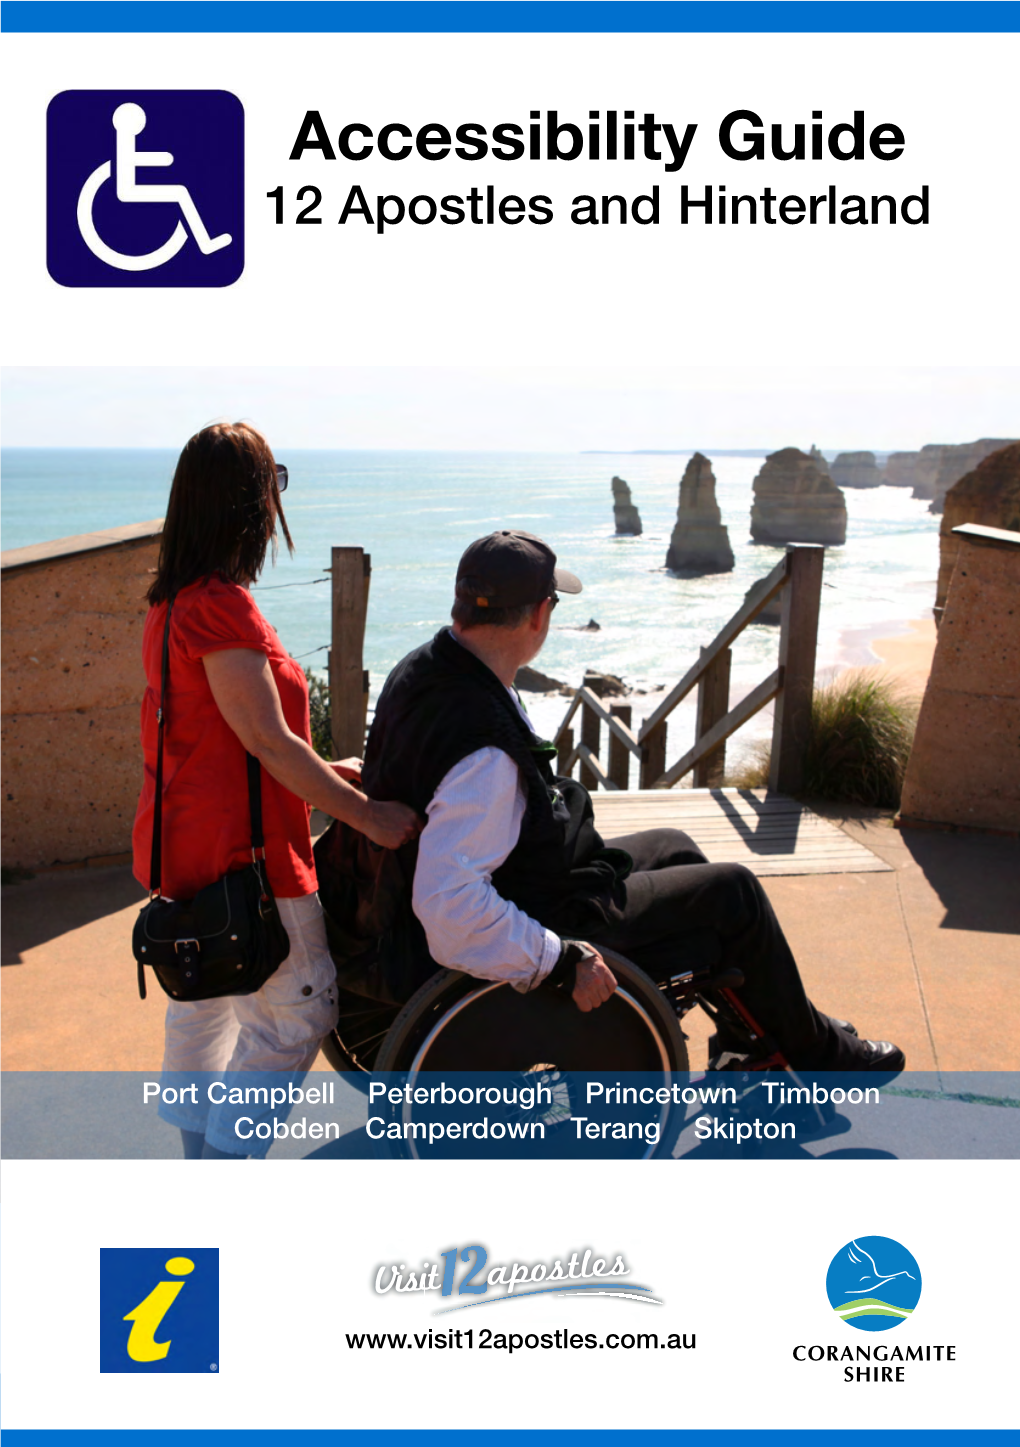 Accessibility Guide 12 Apostles and Hinterland